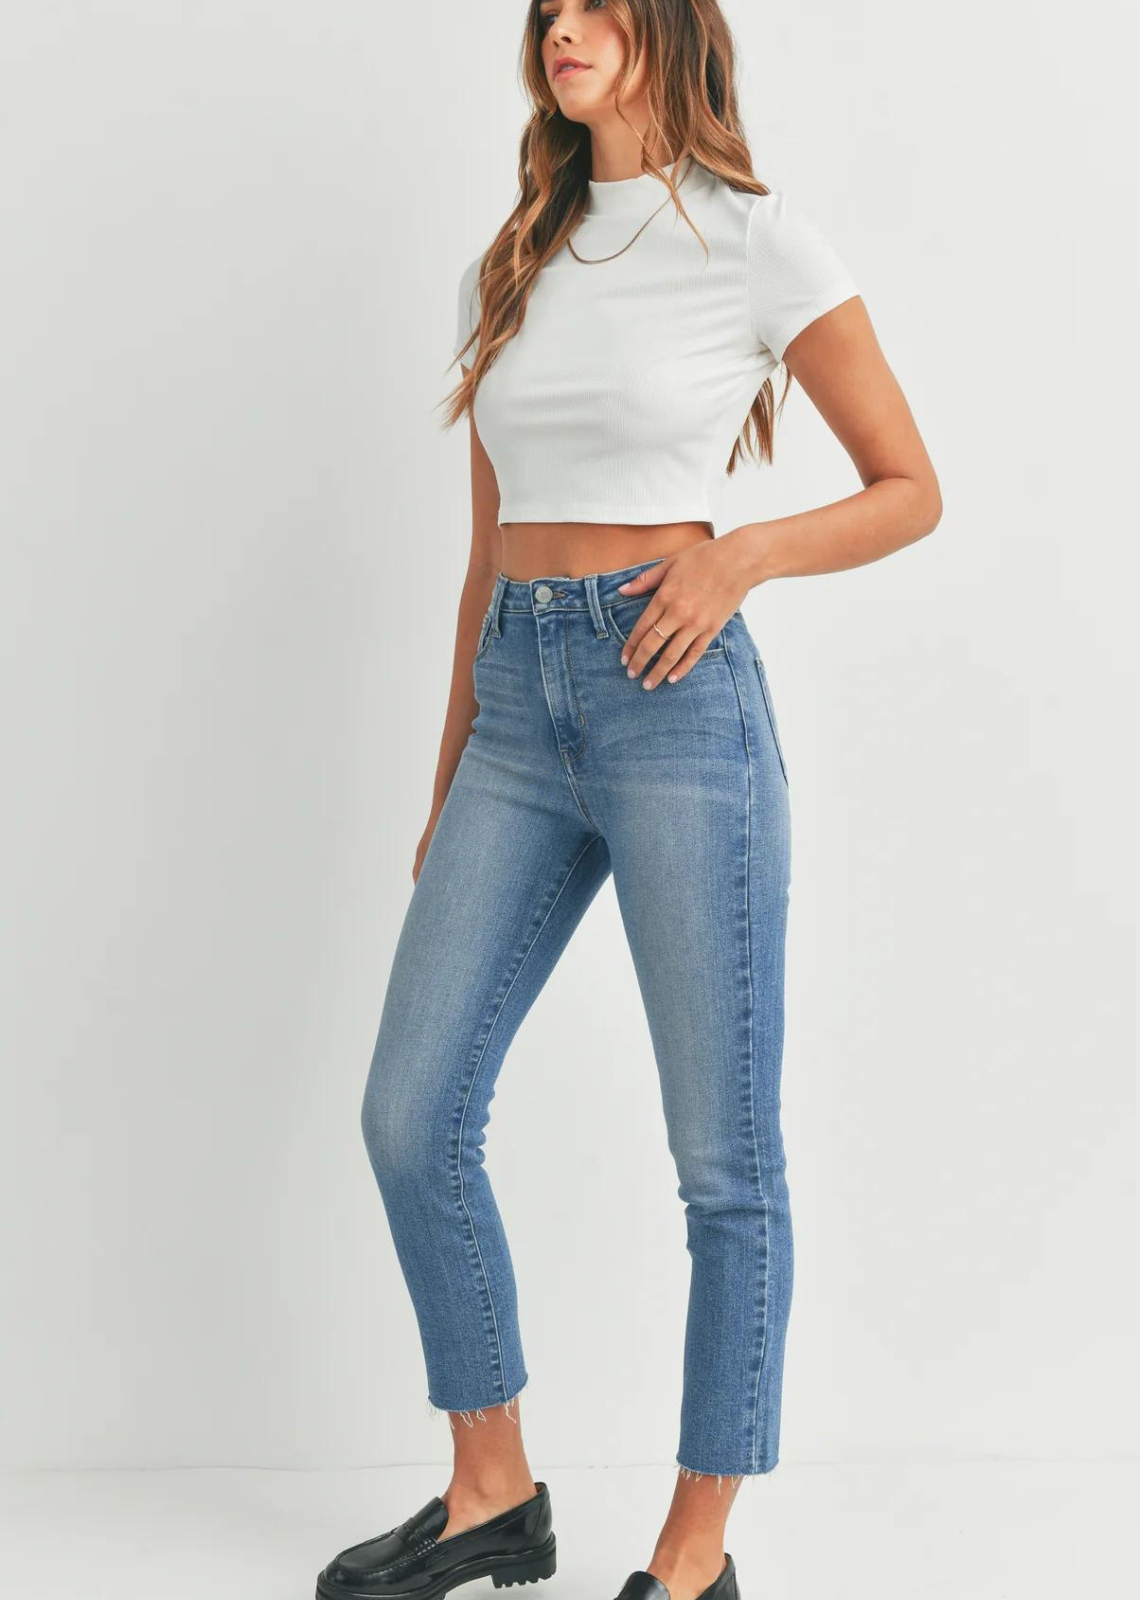 Just Black Denim Keynote Jean. A straight jean that's as versatile as it is comfortable. A medium rinse and medium-rise waist flatter a straight leg with an optic white option, that hits just above your ankle for an on-trend sillouhette.